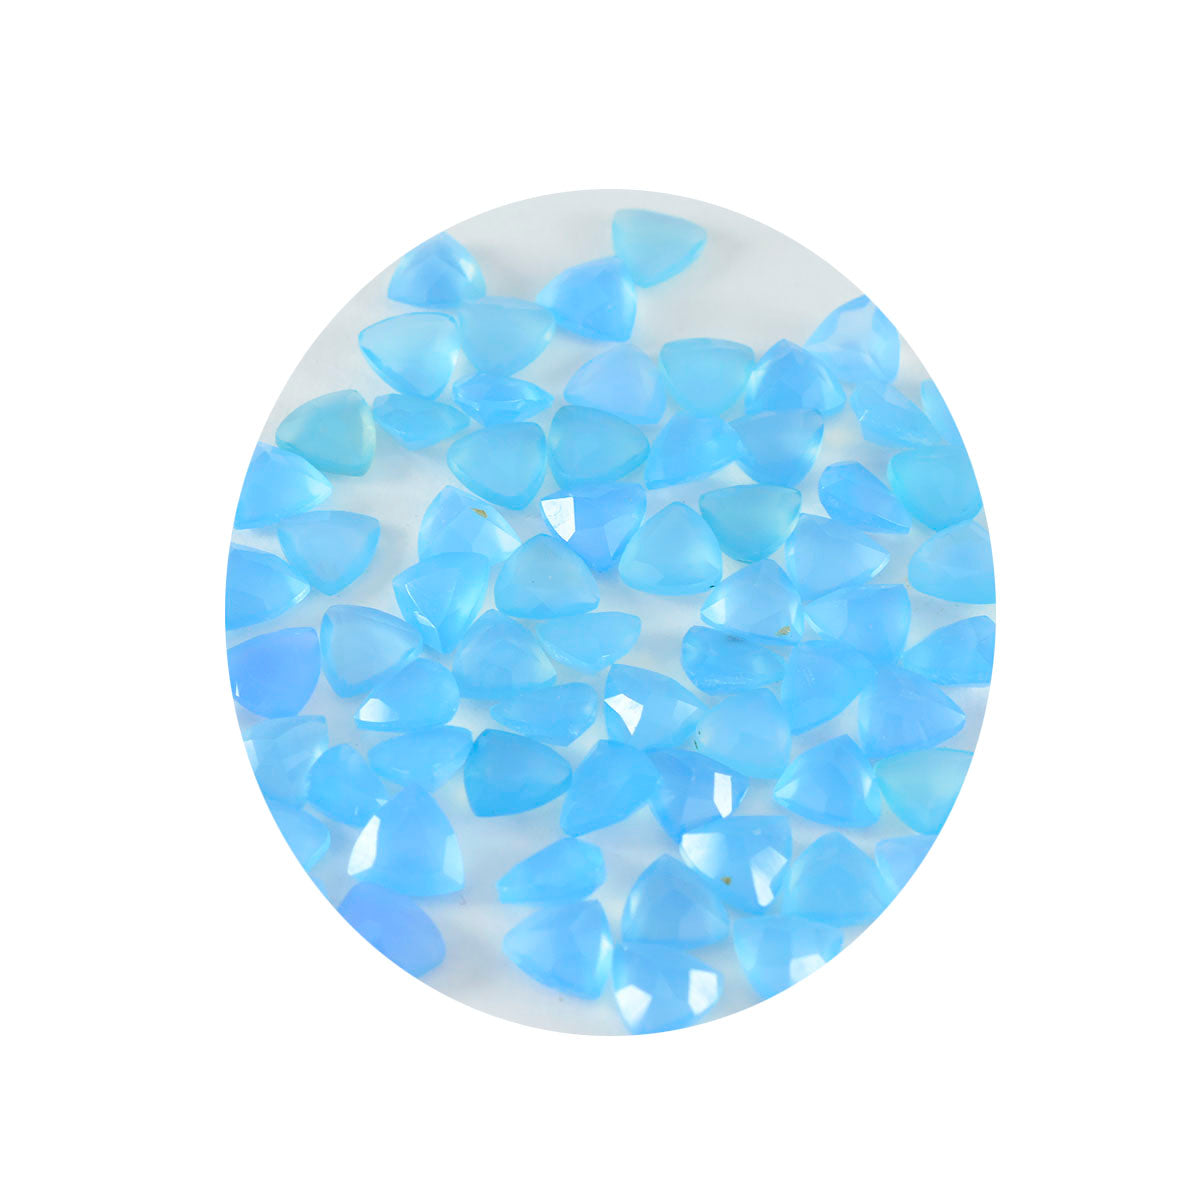 Riyogems 1PC Genuine Blue Chalcedony Faceted 3x3 mm Trillion Shape nice-looking Quality Loose Gems